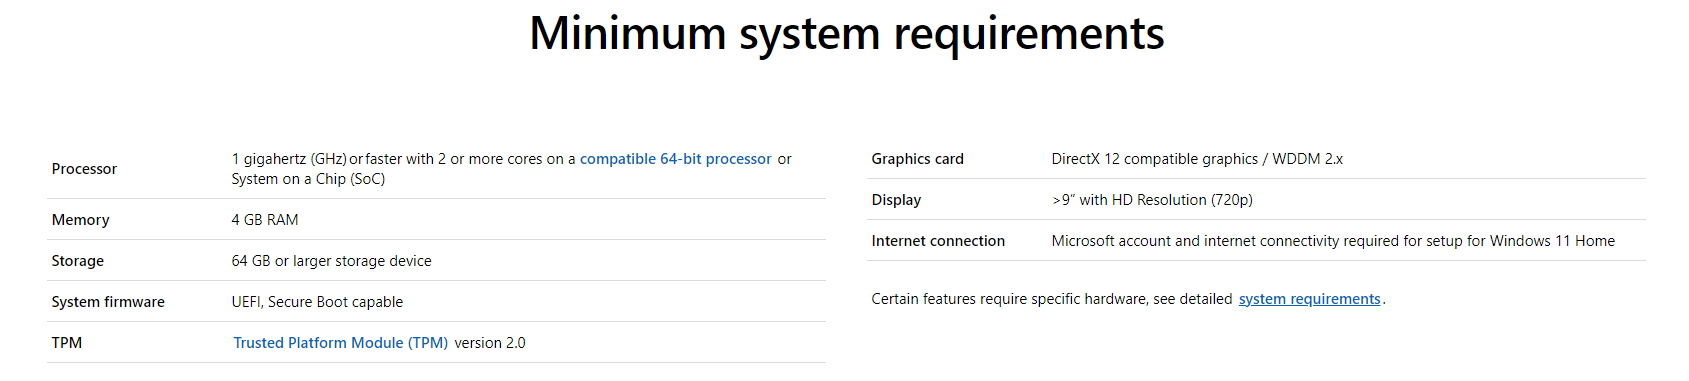 windows11_system_requirements.png